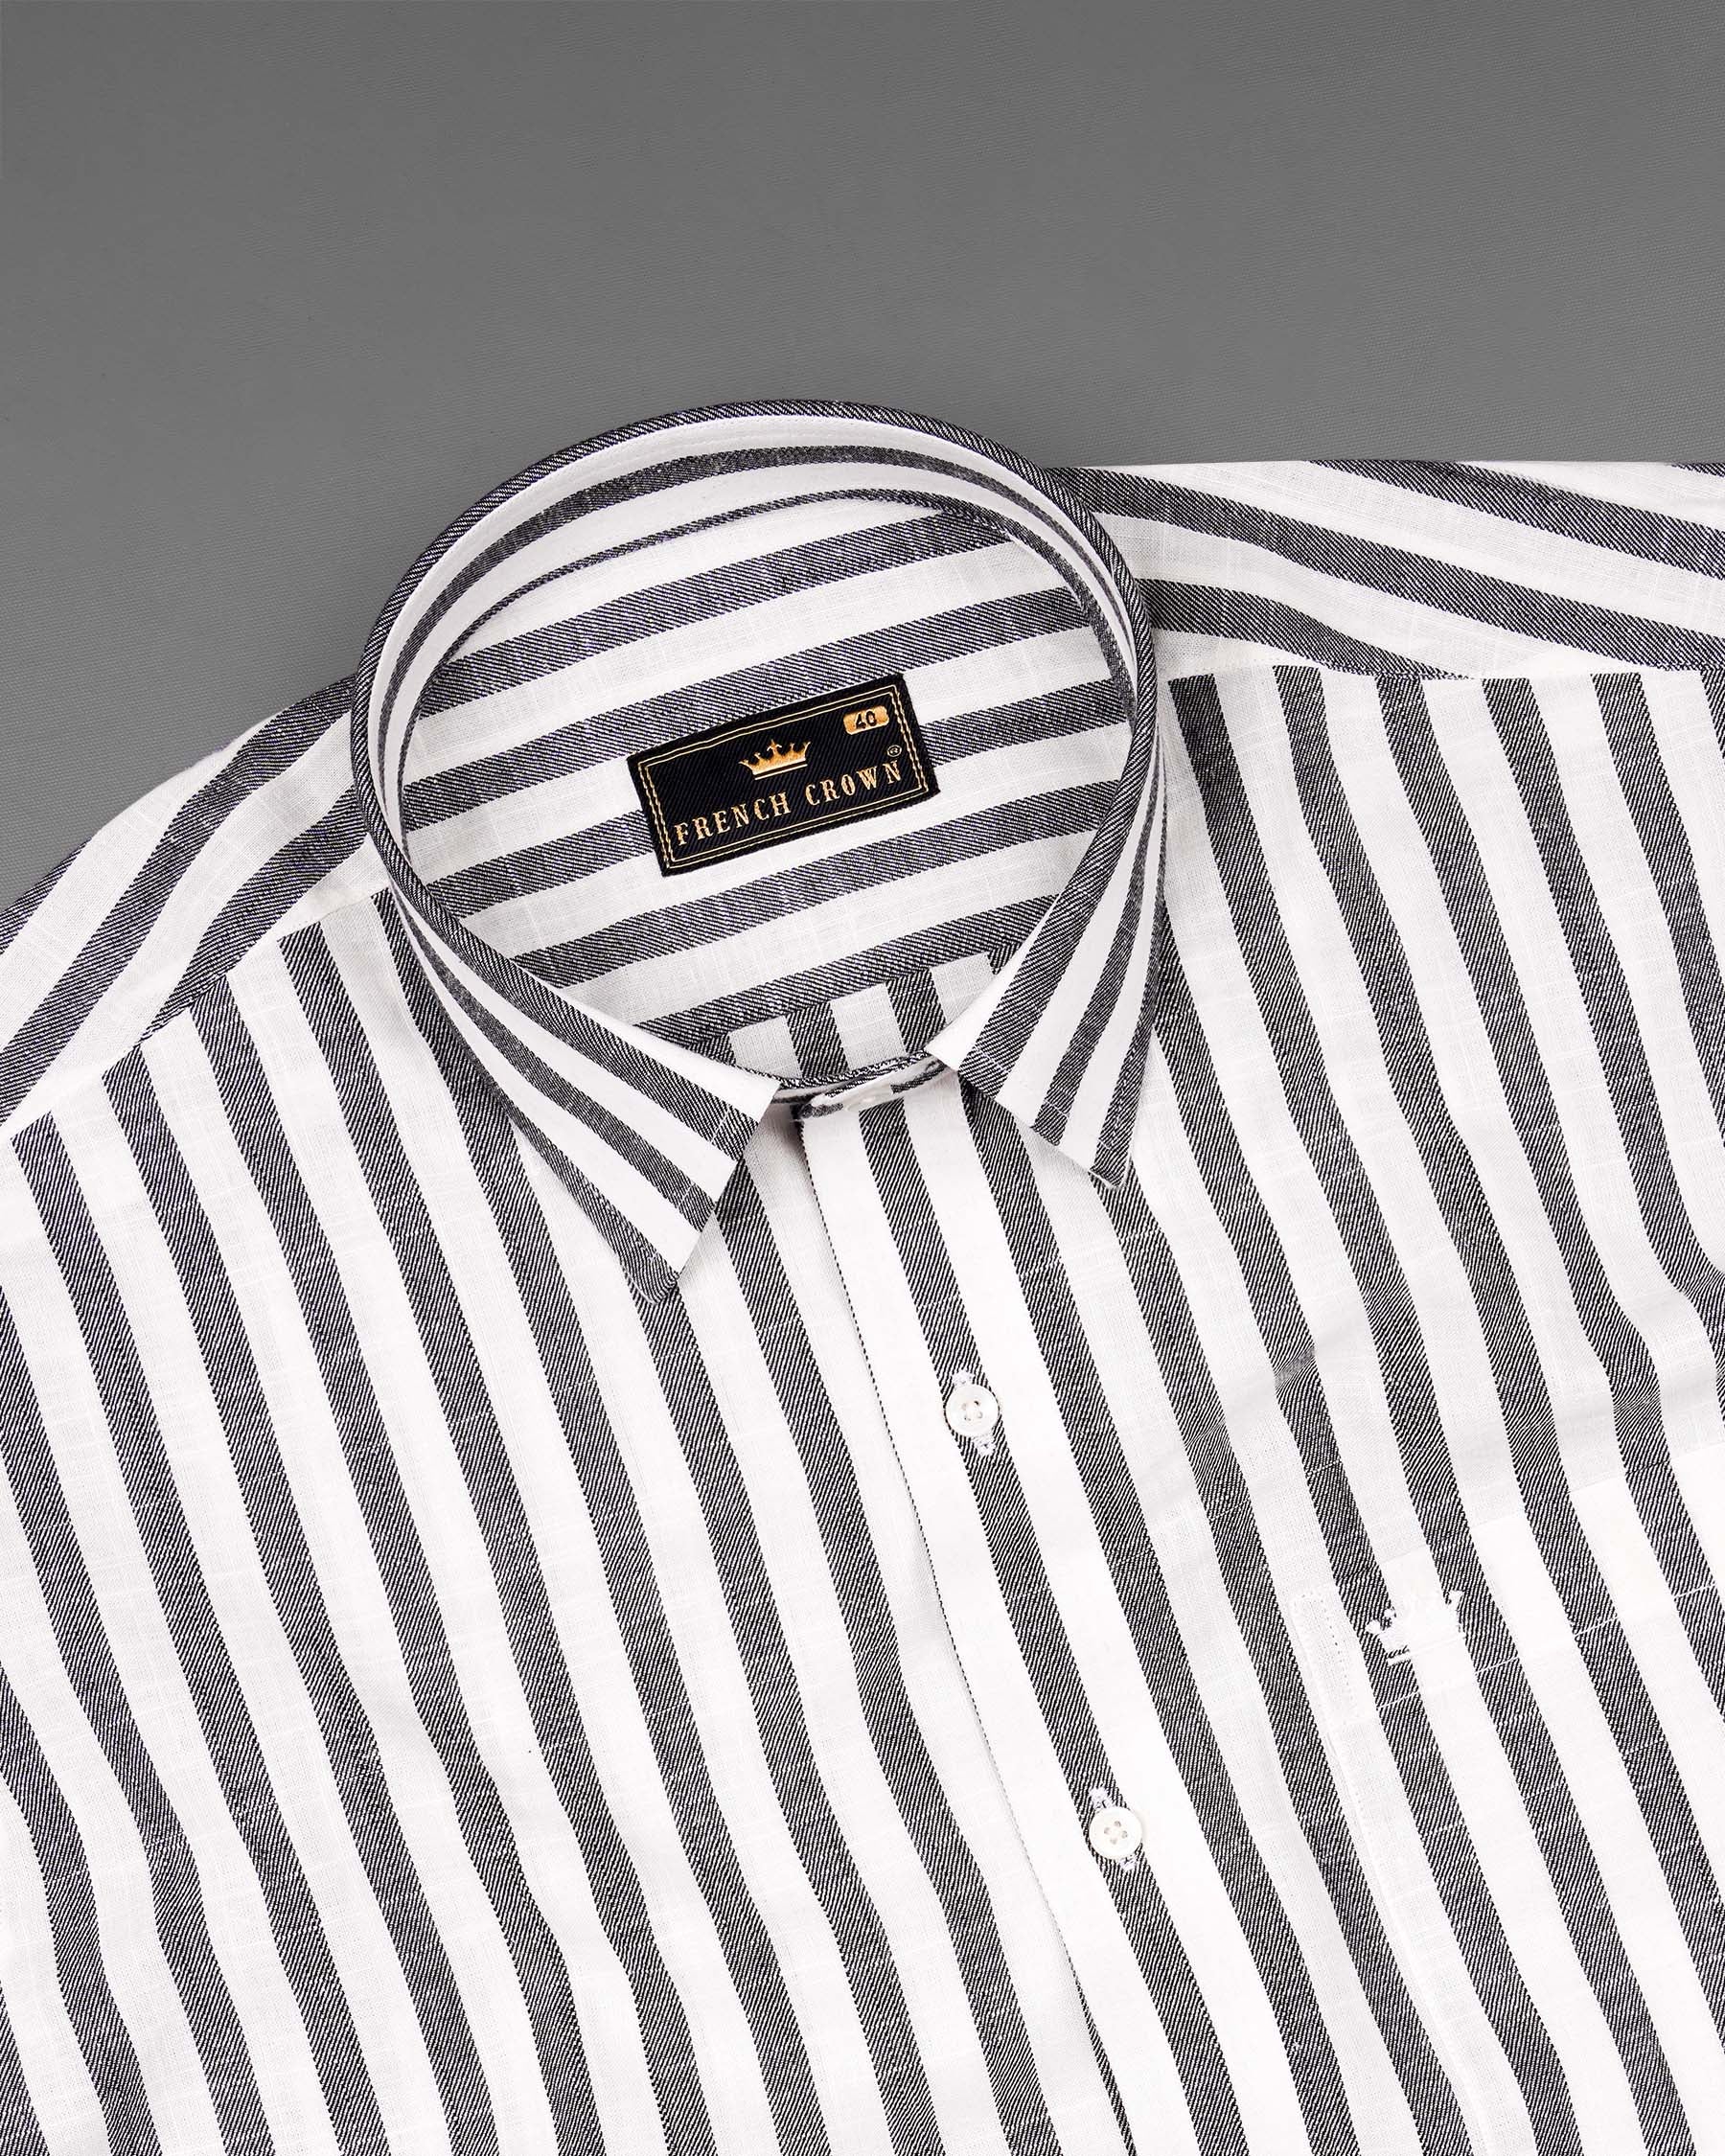 Wenge Gray and Gainsboro Twill Striped Premium Cotton Shirt  7448-38, 7448-H-38, 7448-39, 7448-H-39, 7448-40, 7448-H-40, 7448-42, 7448-H-42, 7448-44, 7448-H-44, 7448-46, 7448-H-46, 7448-48, 7448-H-48, 7448-50, 7448-H-50, 7448-52, 7448-H-52